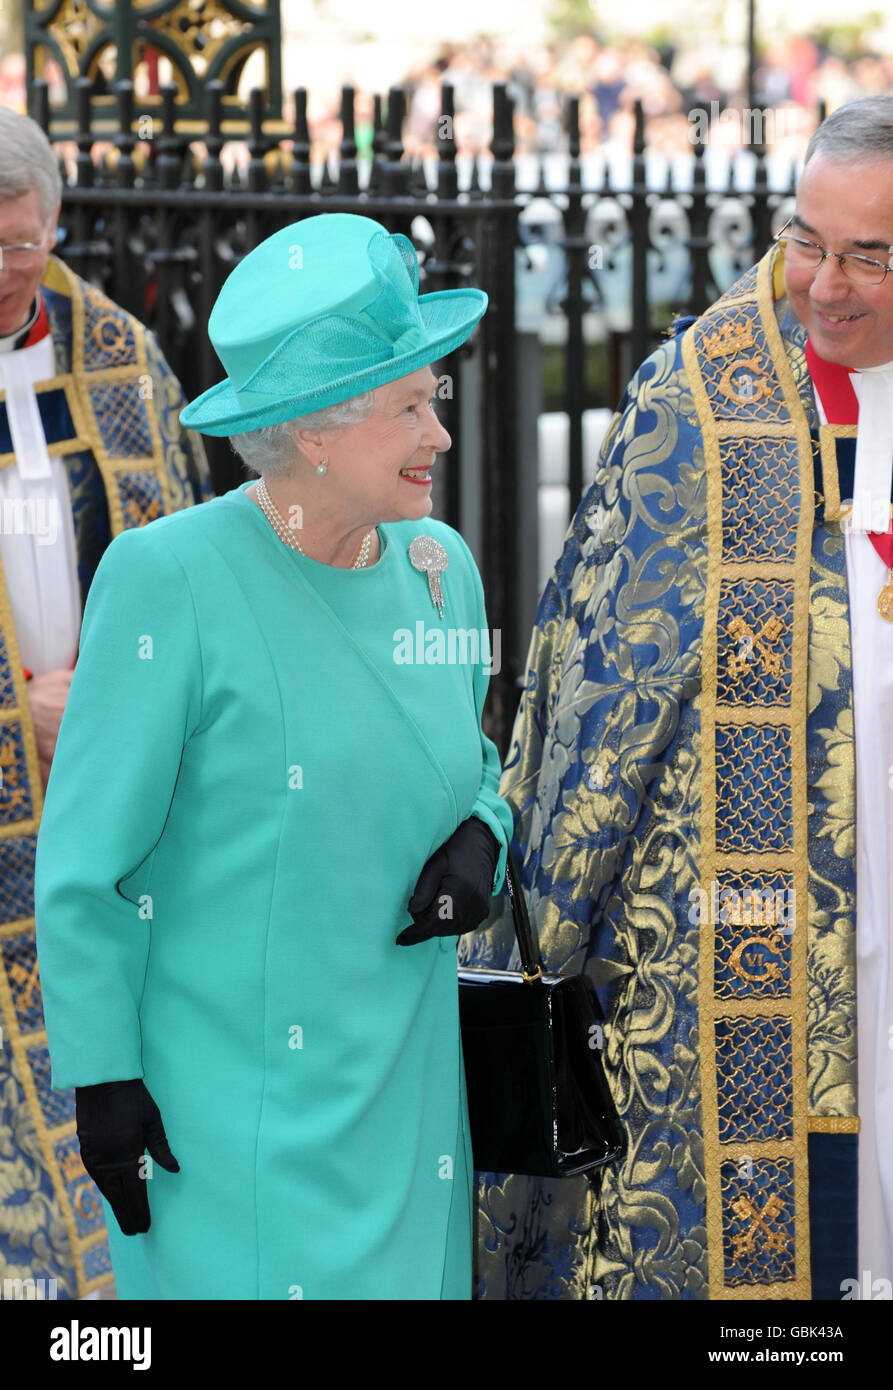 The Queen is escorted by the Dean of Westminster the Very Rev Dr John Hall on her arrival at Westminster Abbey for a service to commemorate the 500th anniversary of the Founder of the Queen's Body Guard of the Yeoman of the Guard. Stock Photo